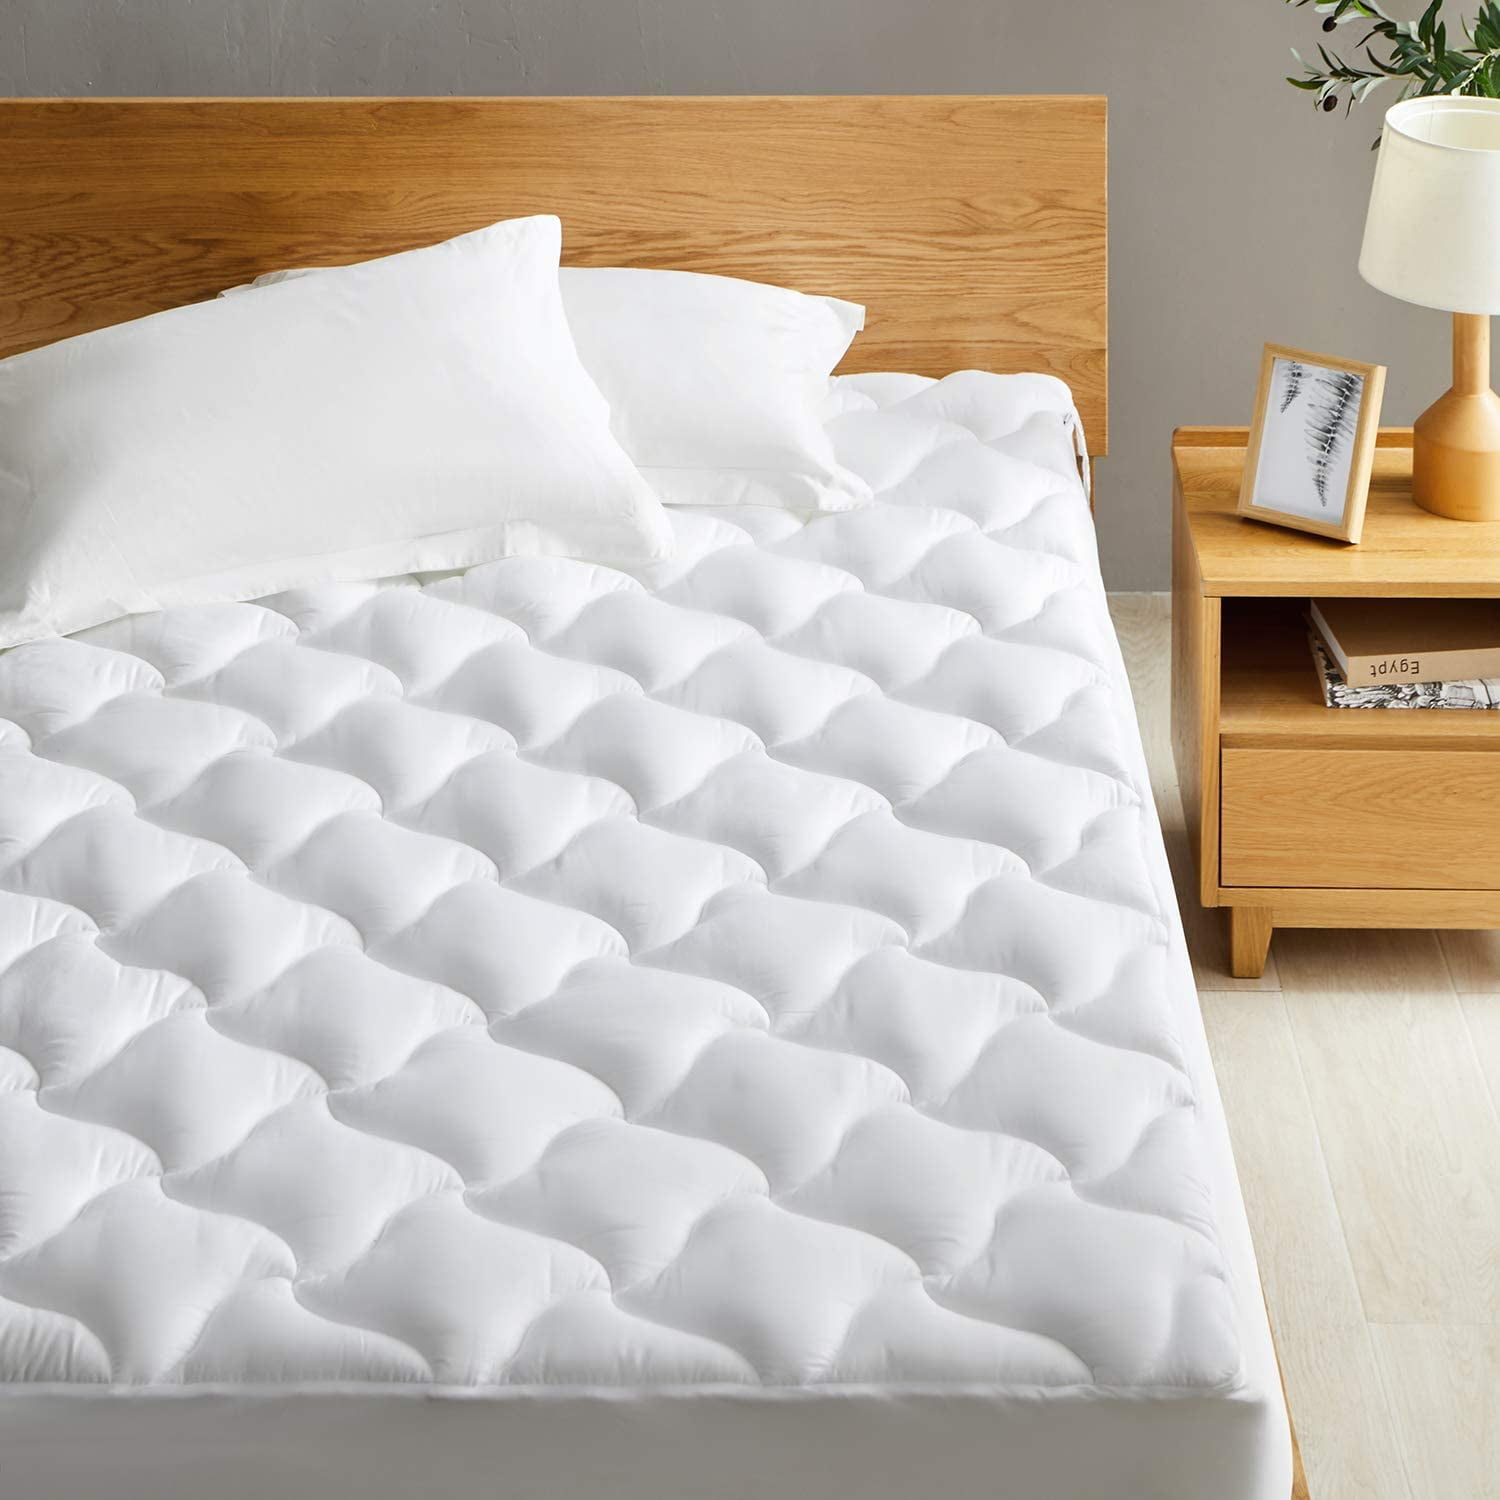 Mattress Pad Twin Size with Deep Pocket Microplush Mattress Topper with Fitted Skirt Quilted Stretch Pillow Top